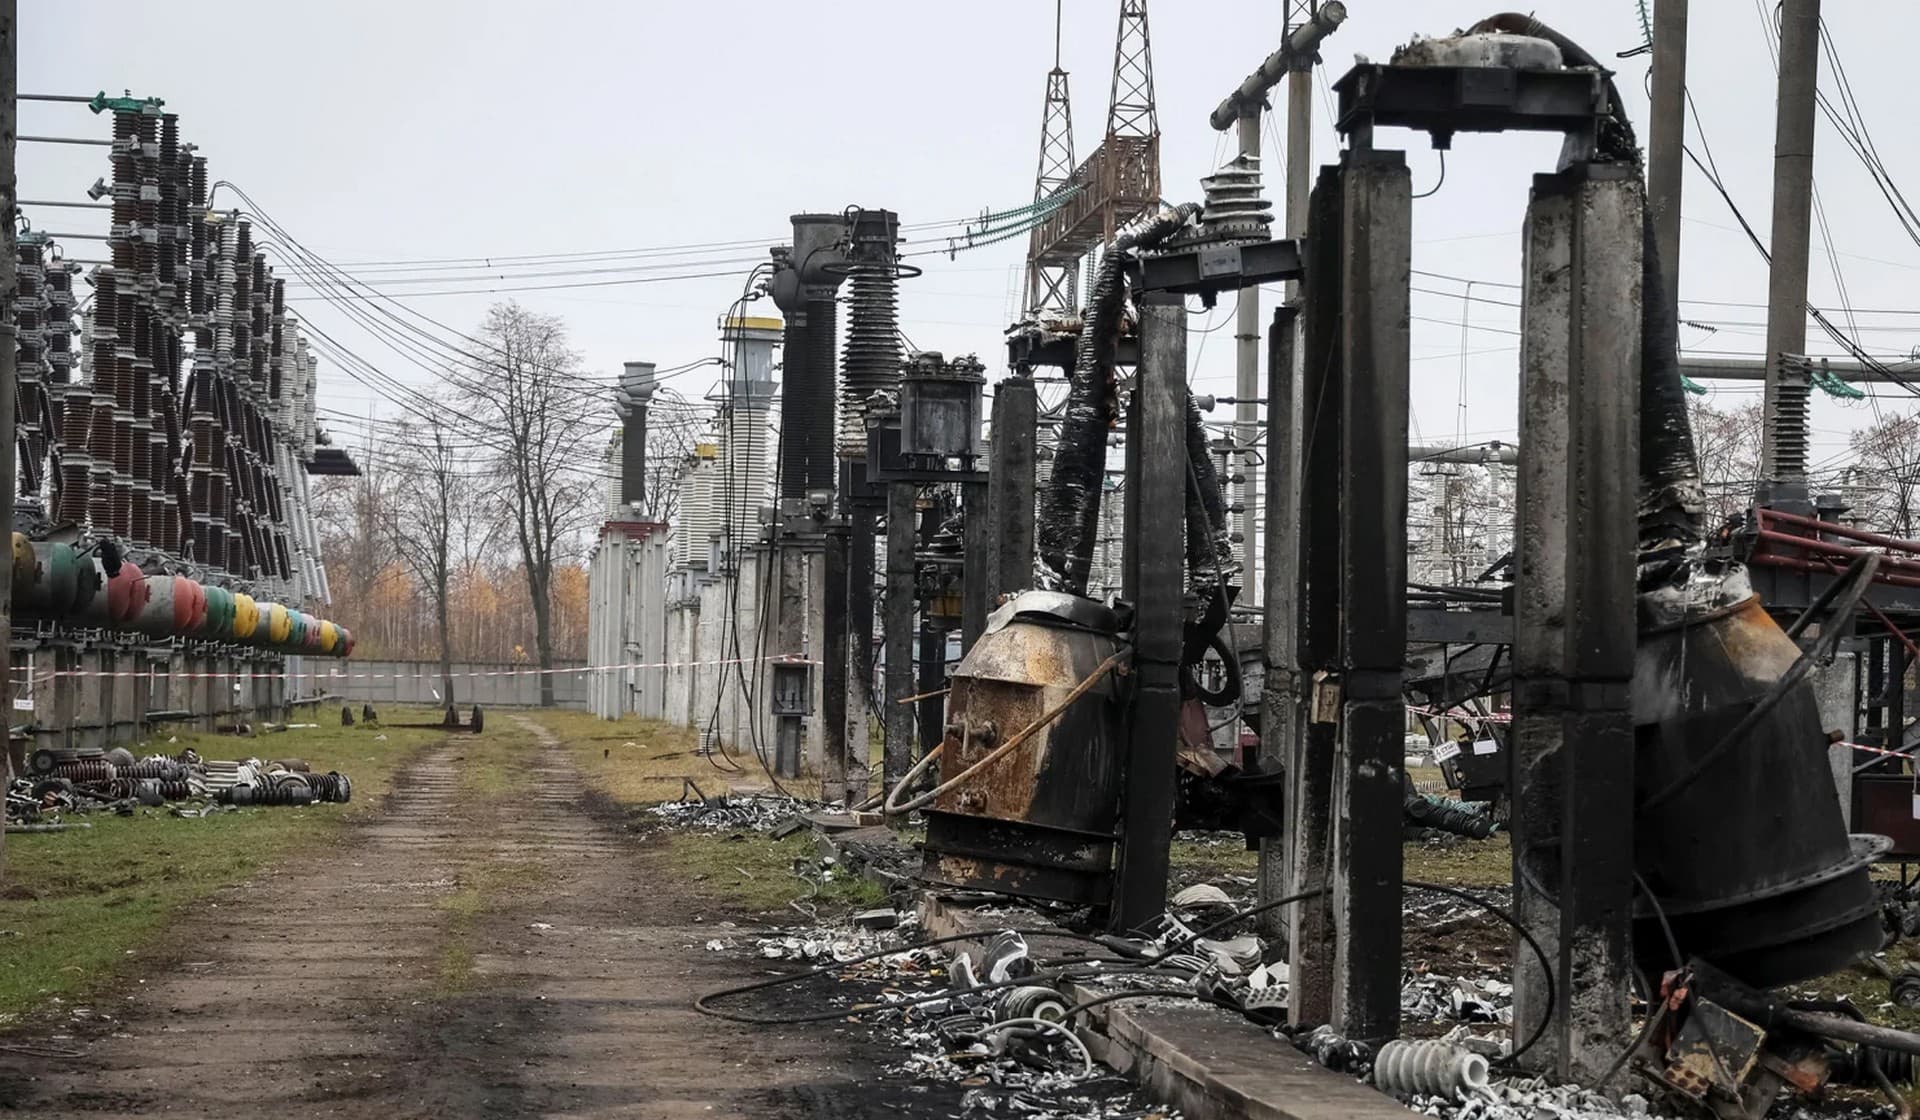 A high-voltage substation of Ukrenergo damaged in a Russian military strike in the central region of Ukraine